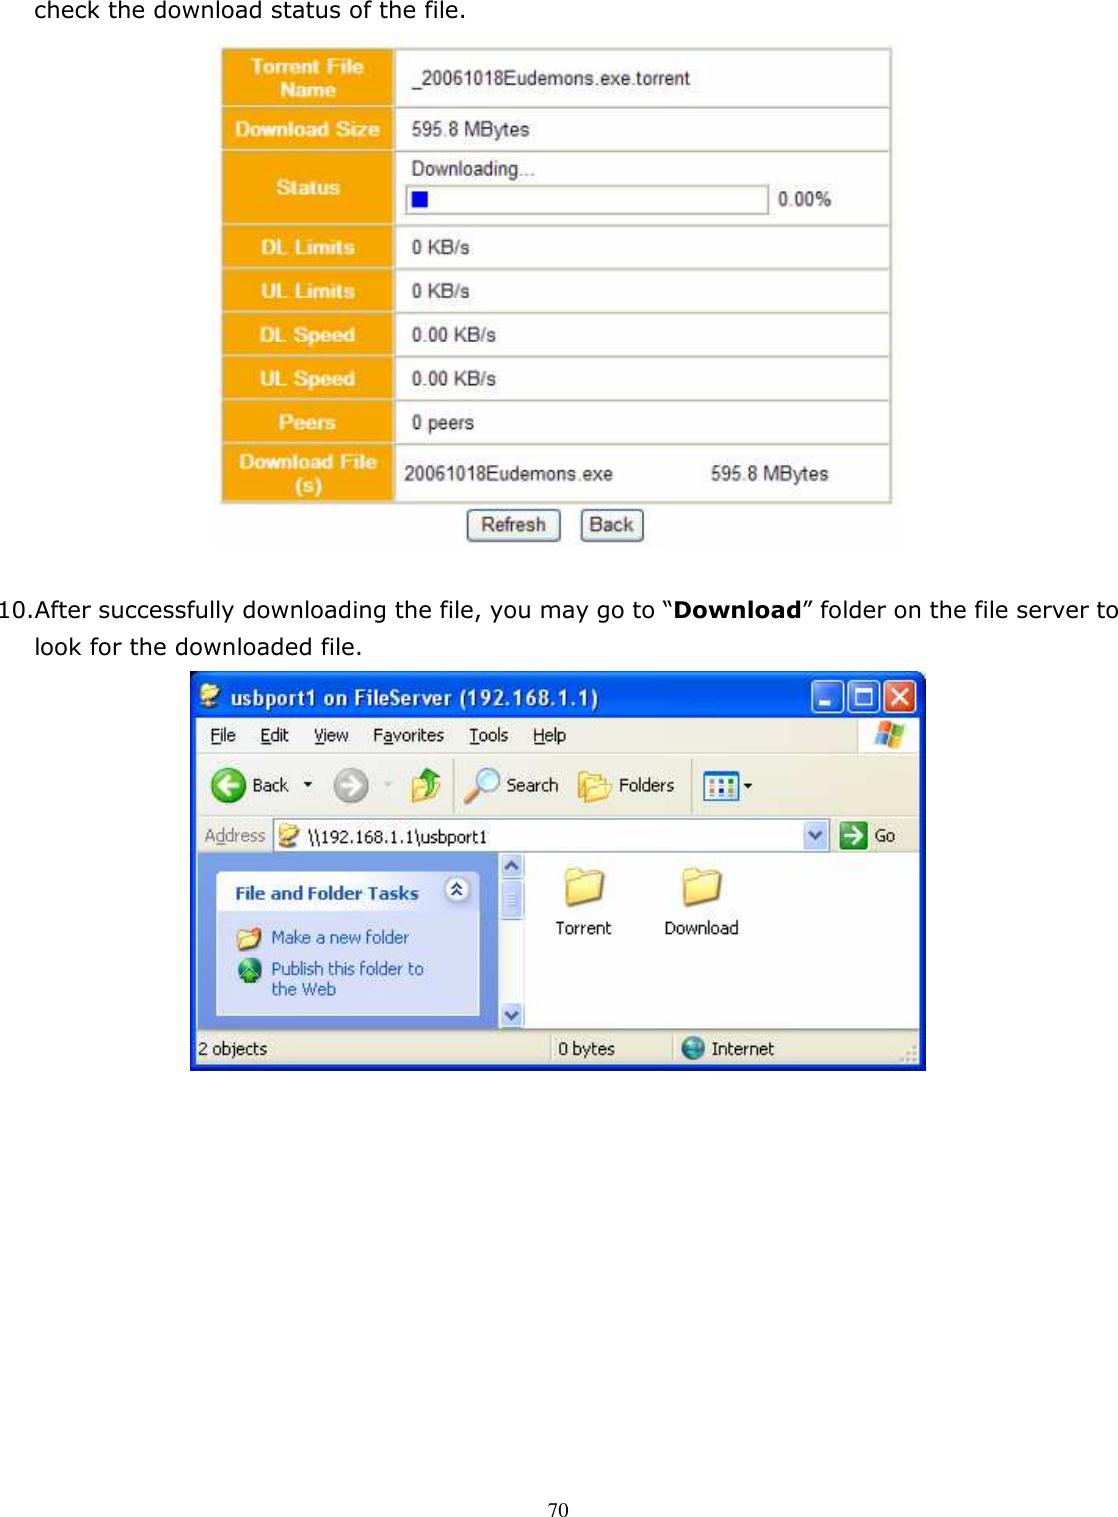   70check the download status of the file.   10.After successfully downloading the file, you may go to “Download” folder on the file server to look for the downloaded file.     